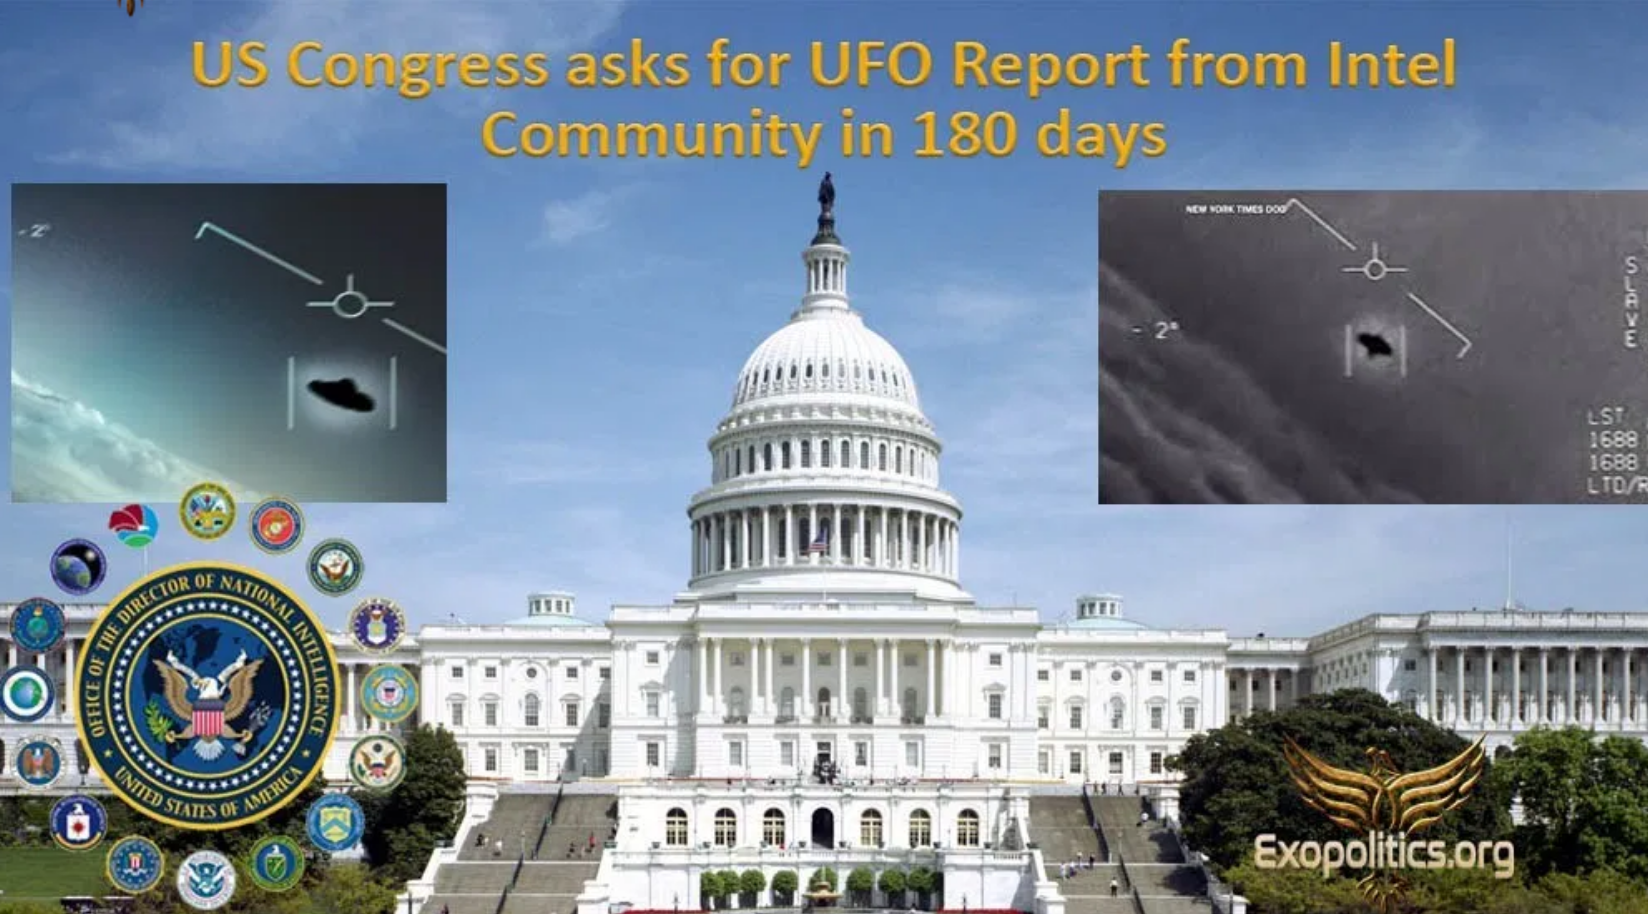 US Congress Asks for UFO Report from Intel Community in 180 days